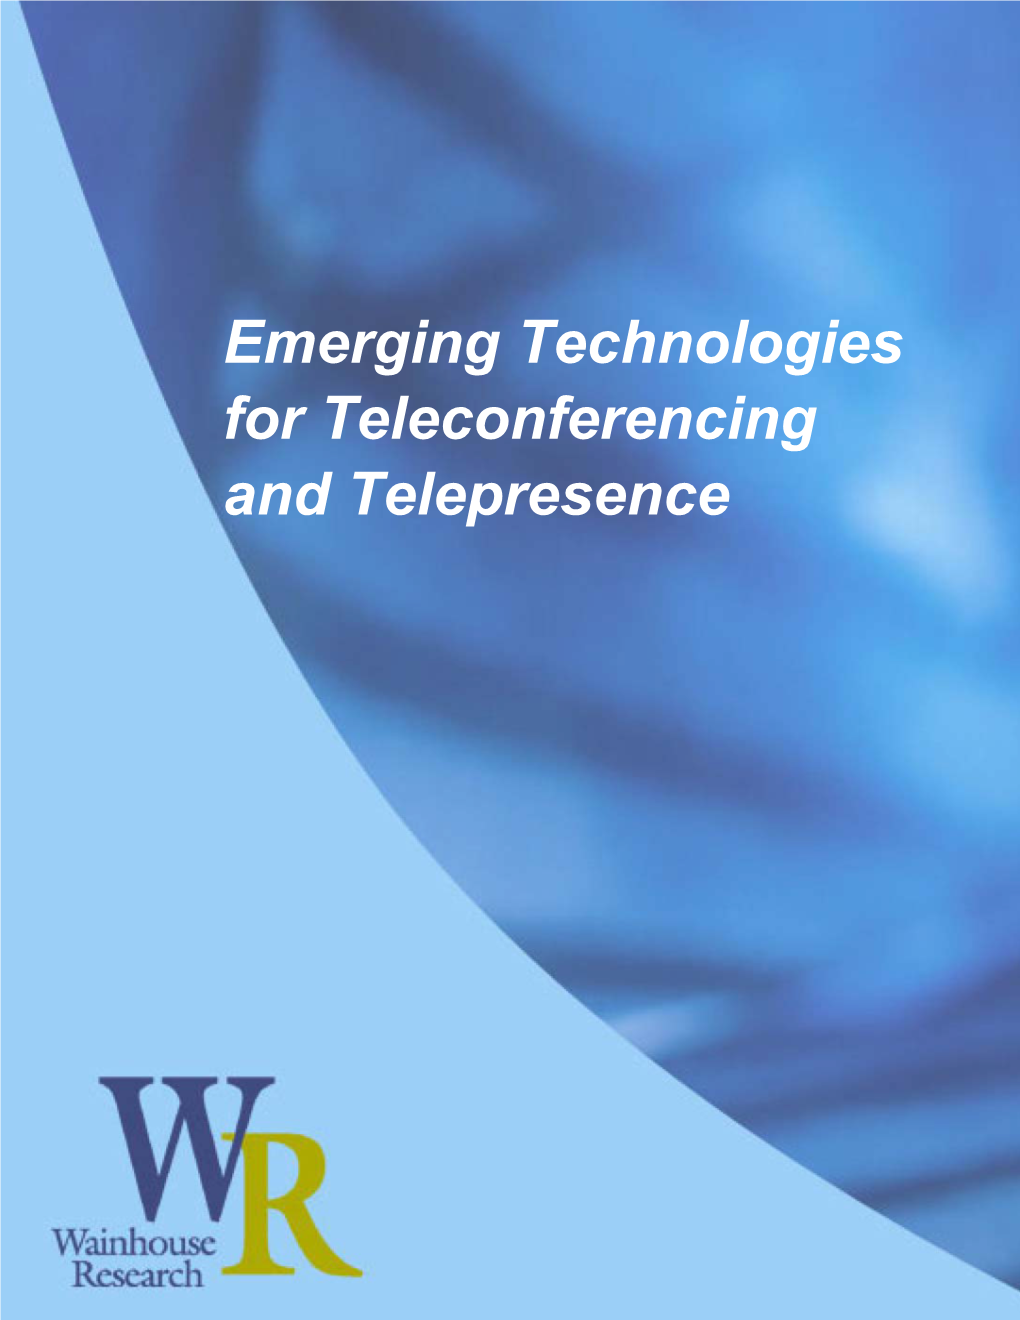 Emerging Technologies for Teleconferencing and Telepresence